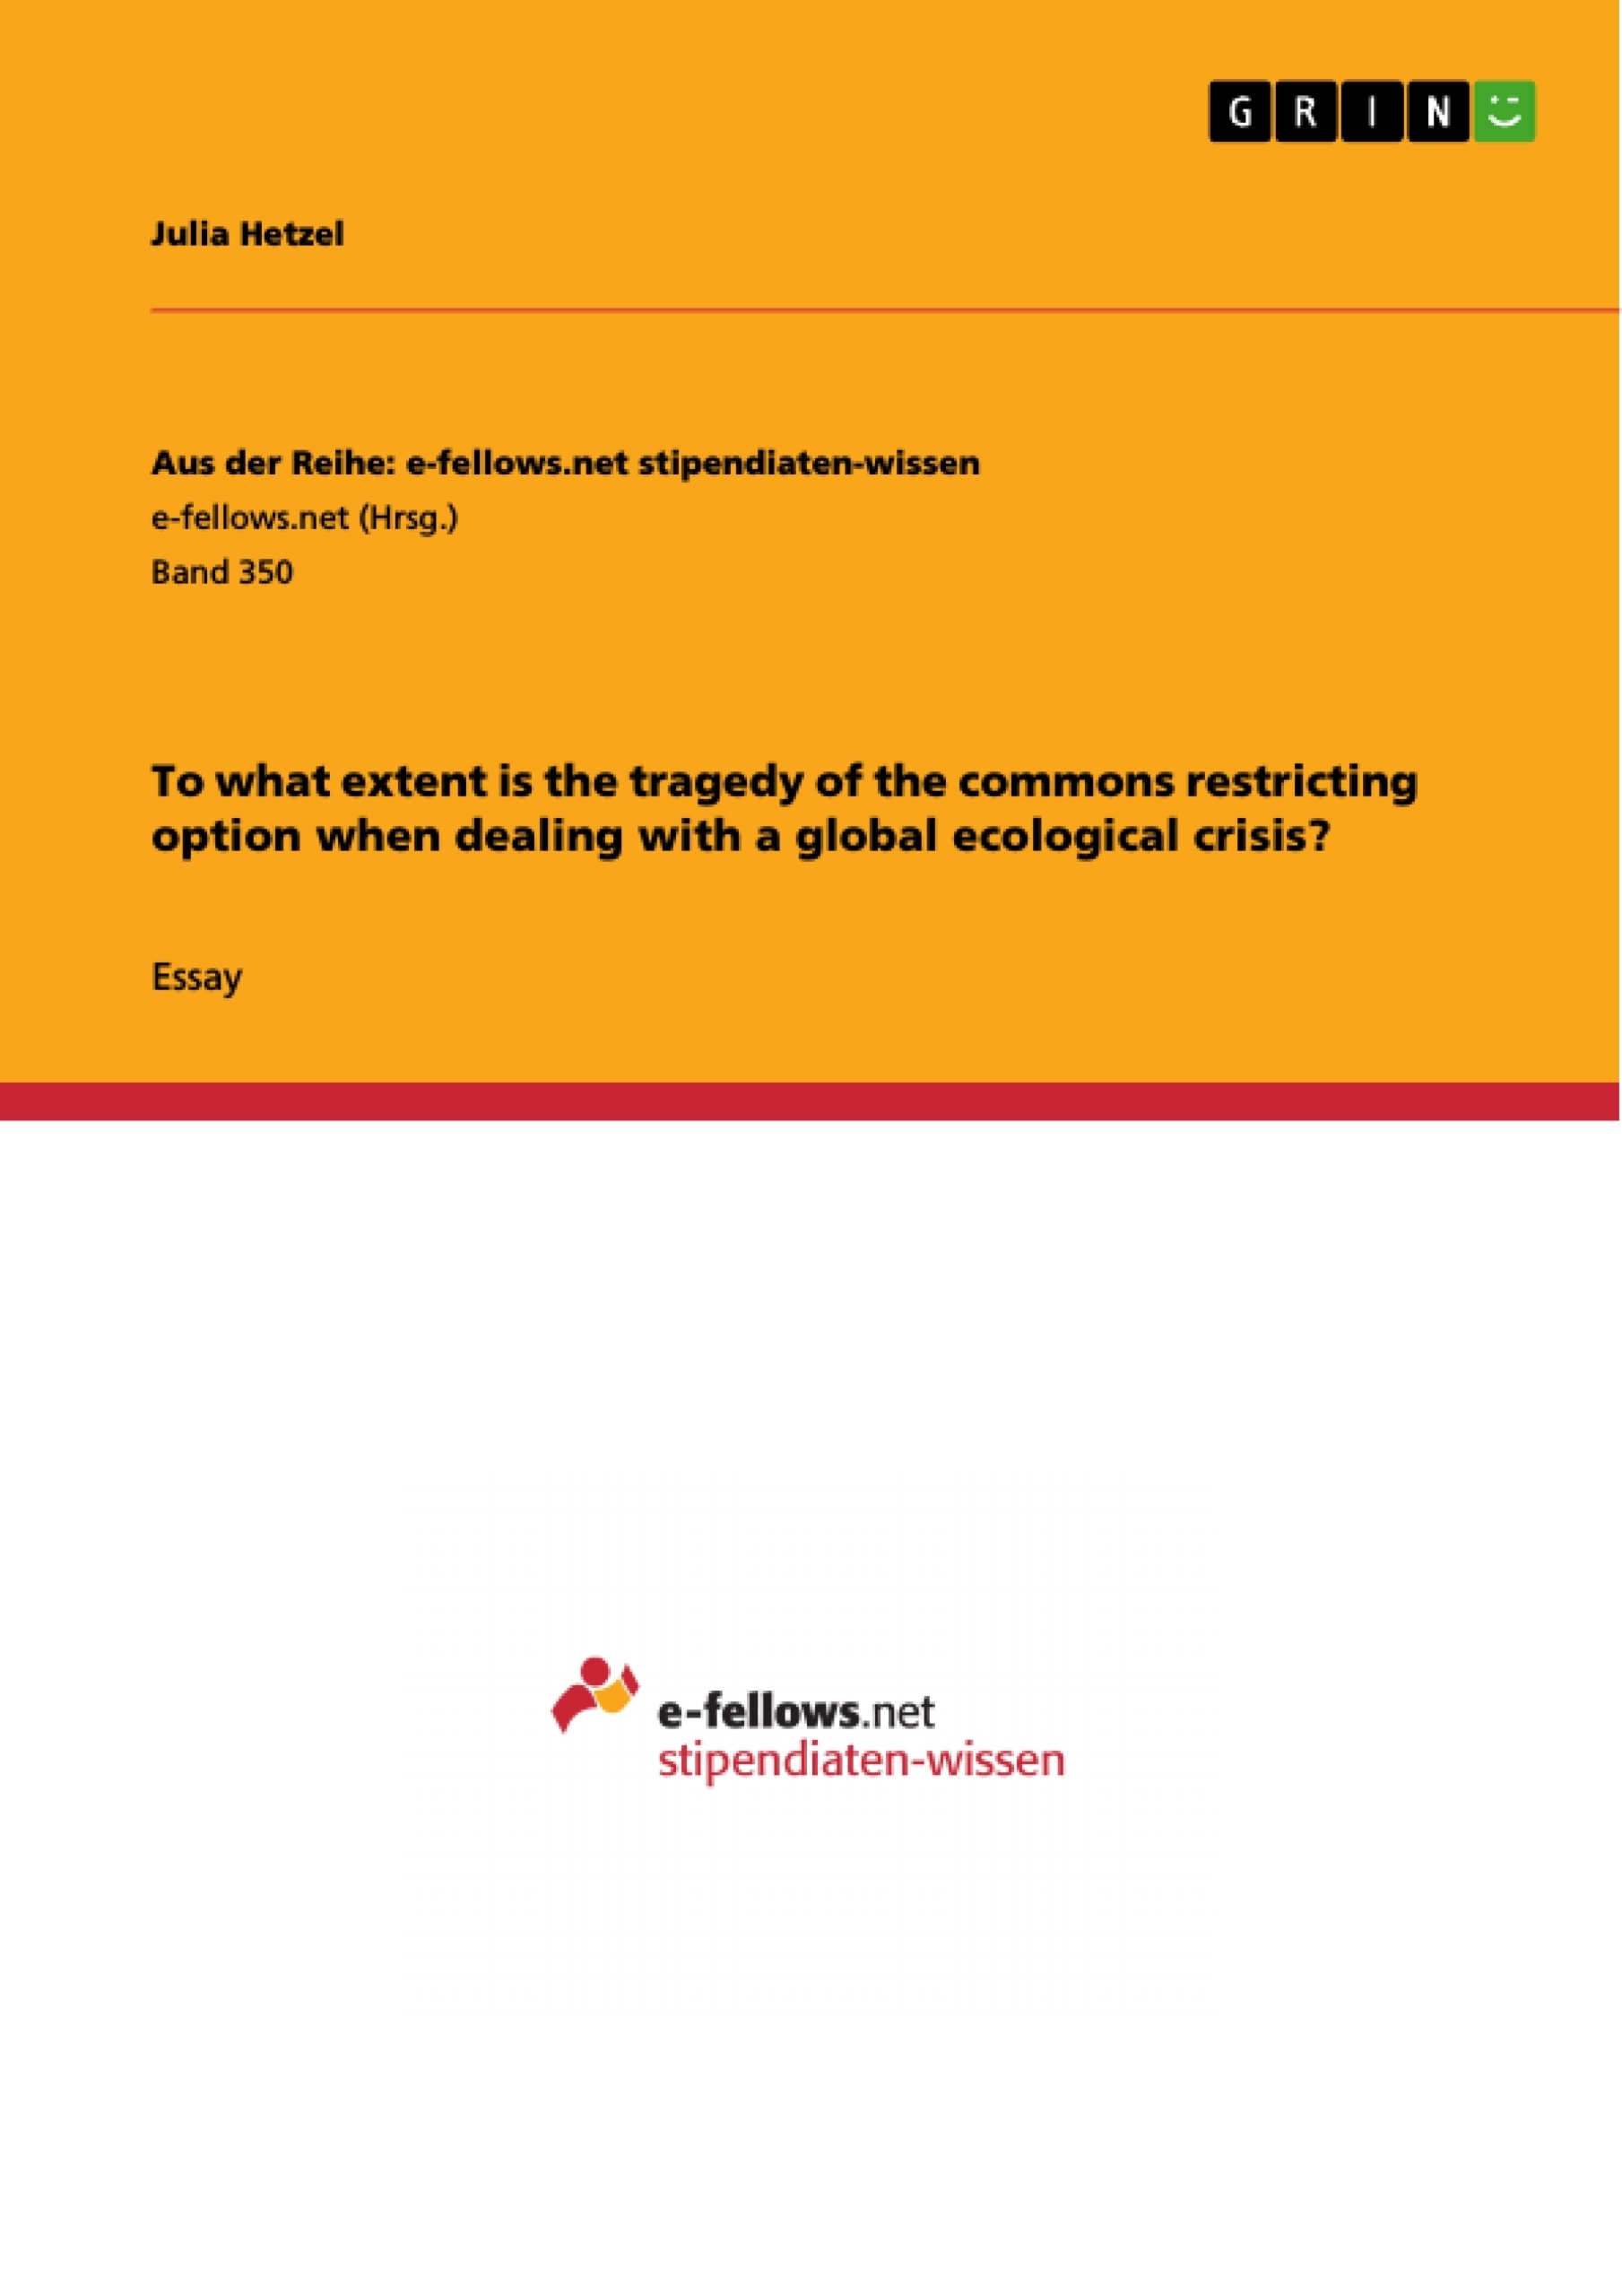 Title: To what extent is the tragedy of the commons restricting option when dealing with a global ecological crisis?